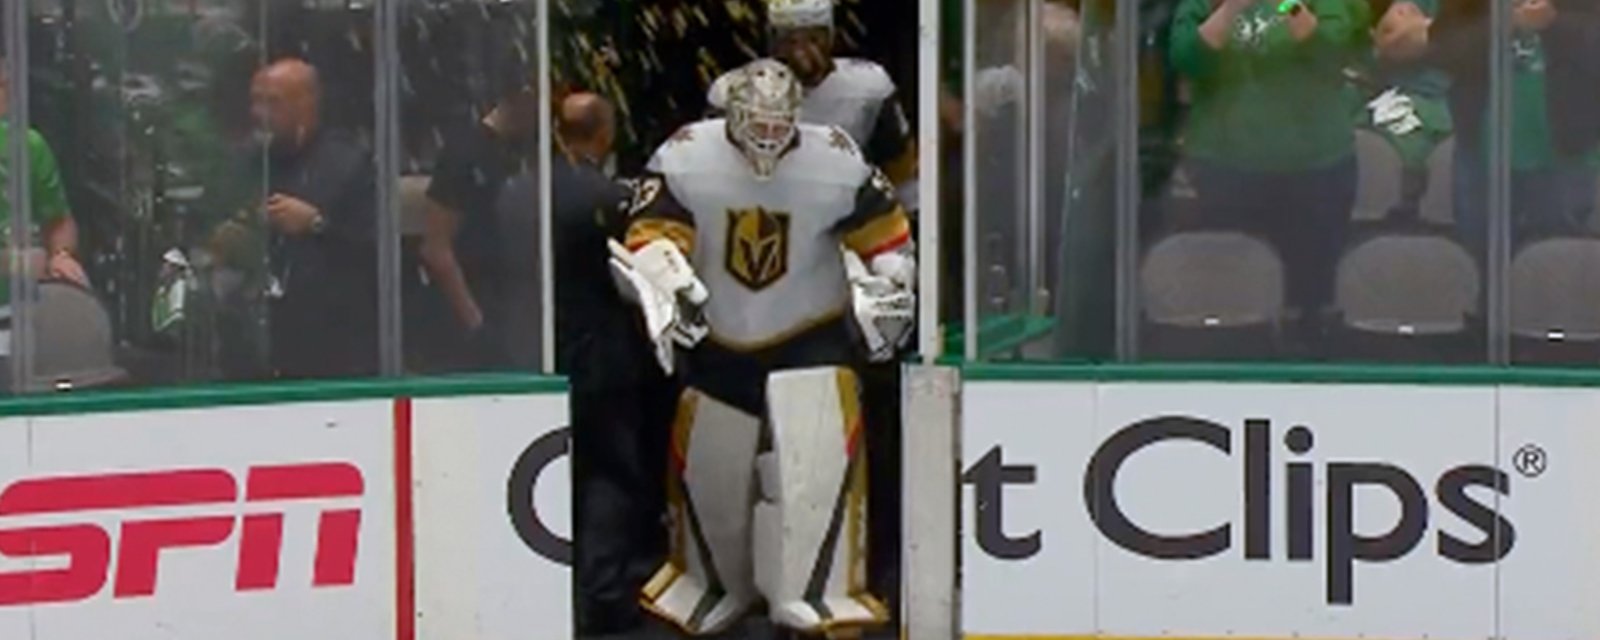 Knights pelted with more trash as they take the ice for the 3rd period